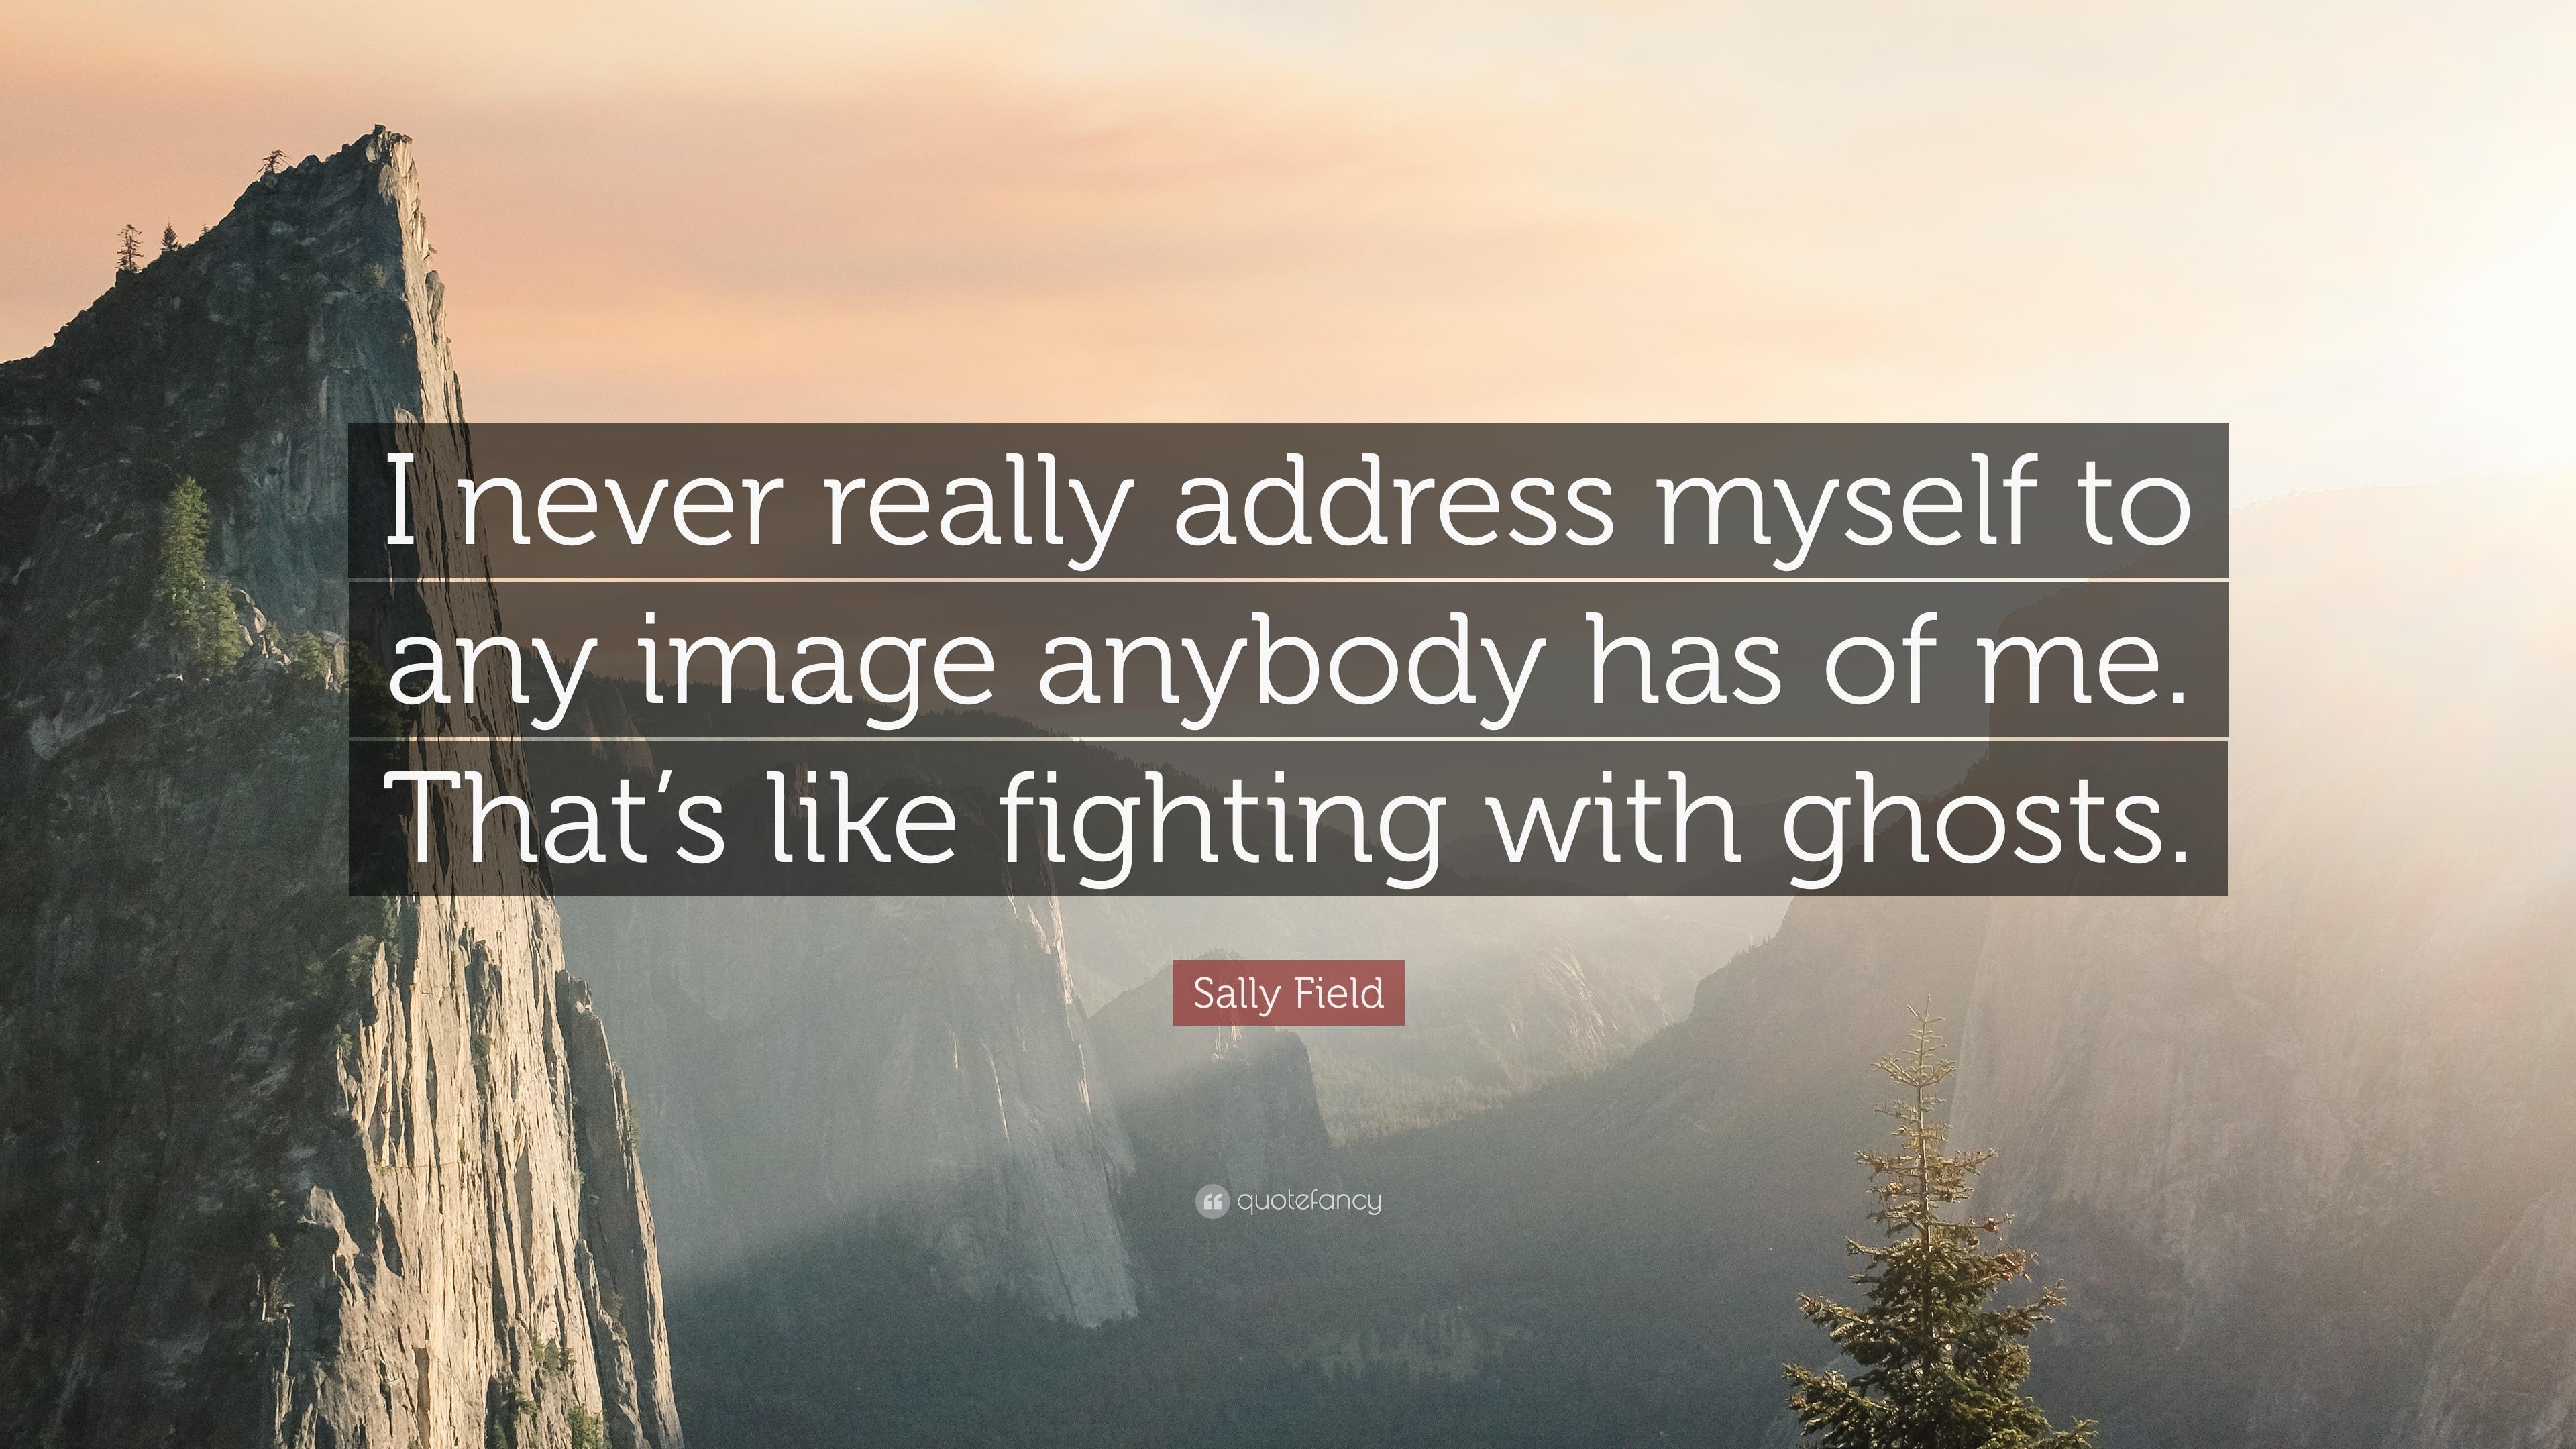 Sally Field Quote: “I never really address myself to any image